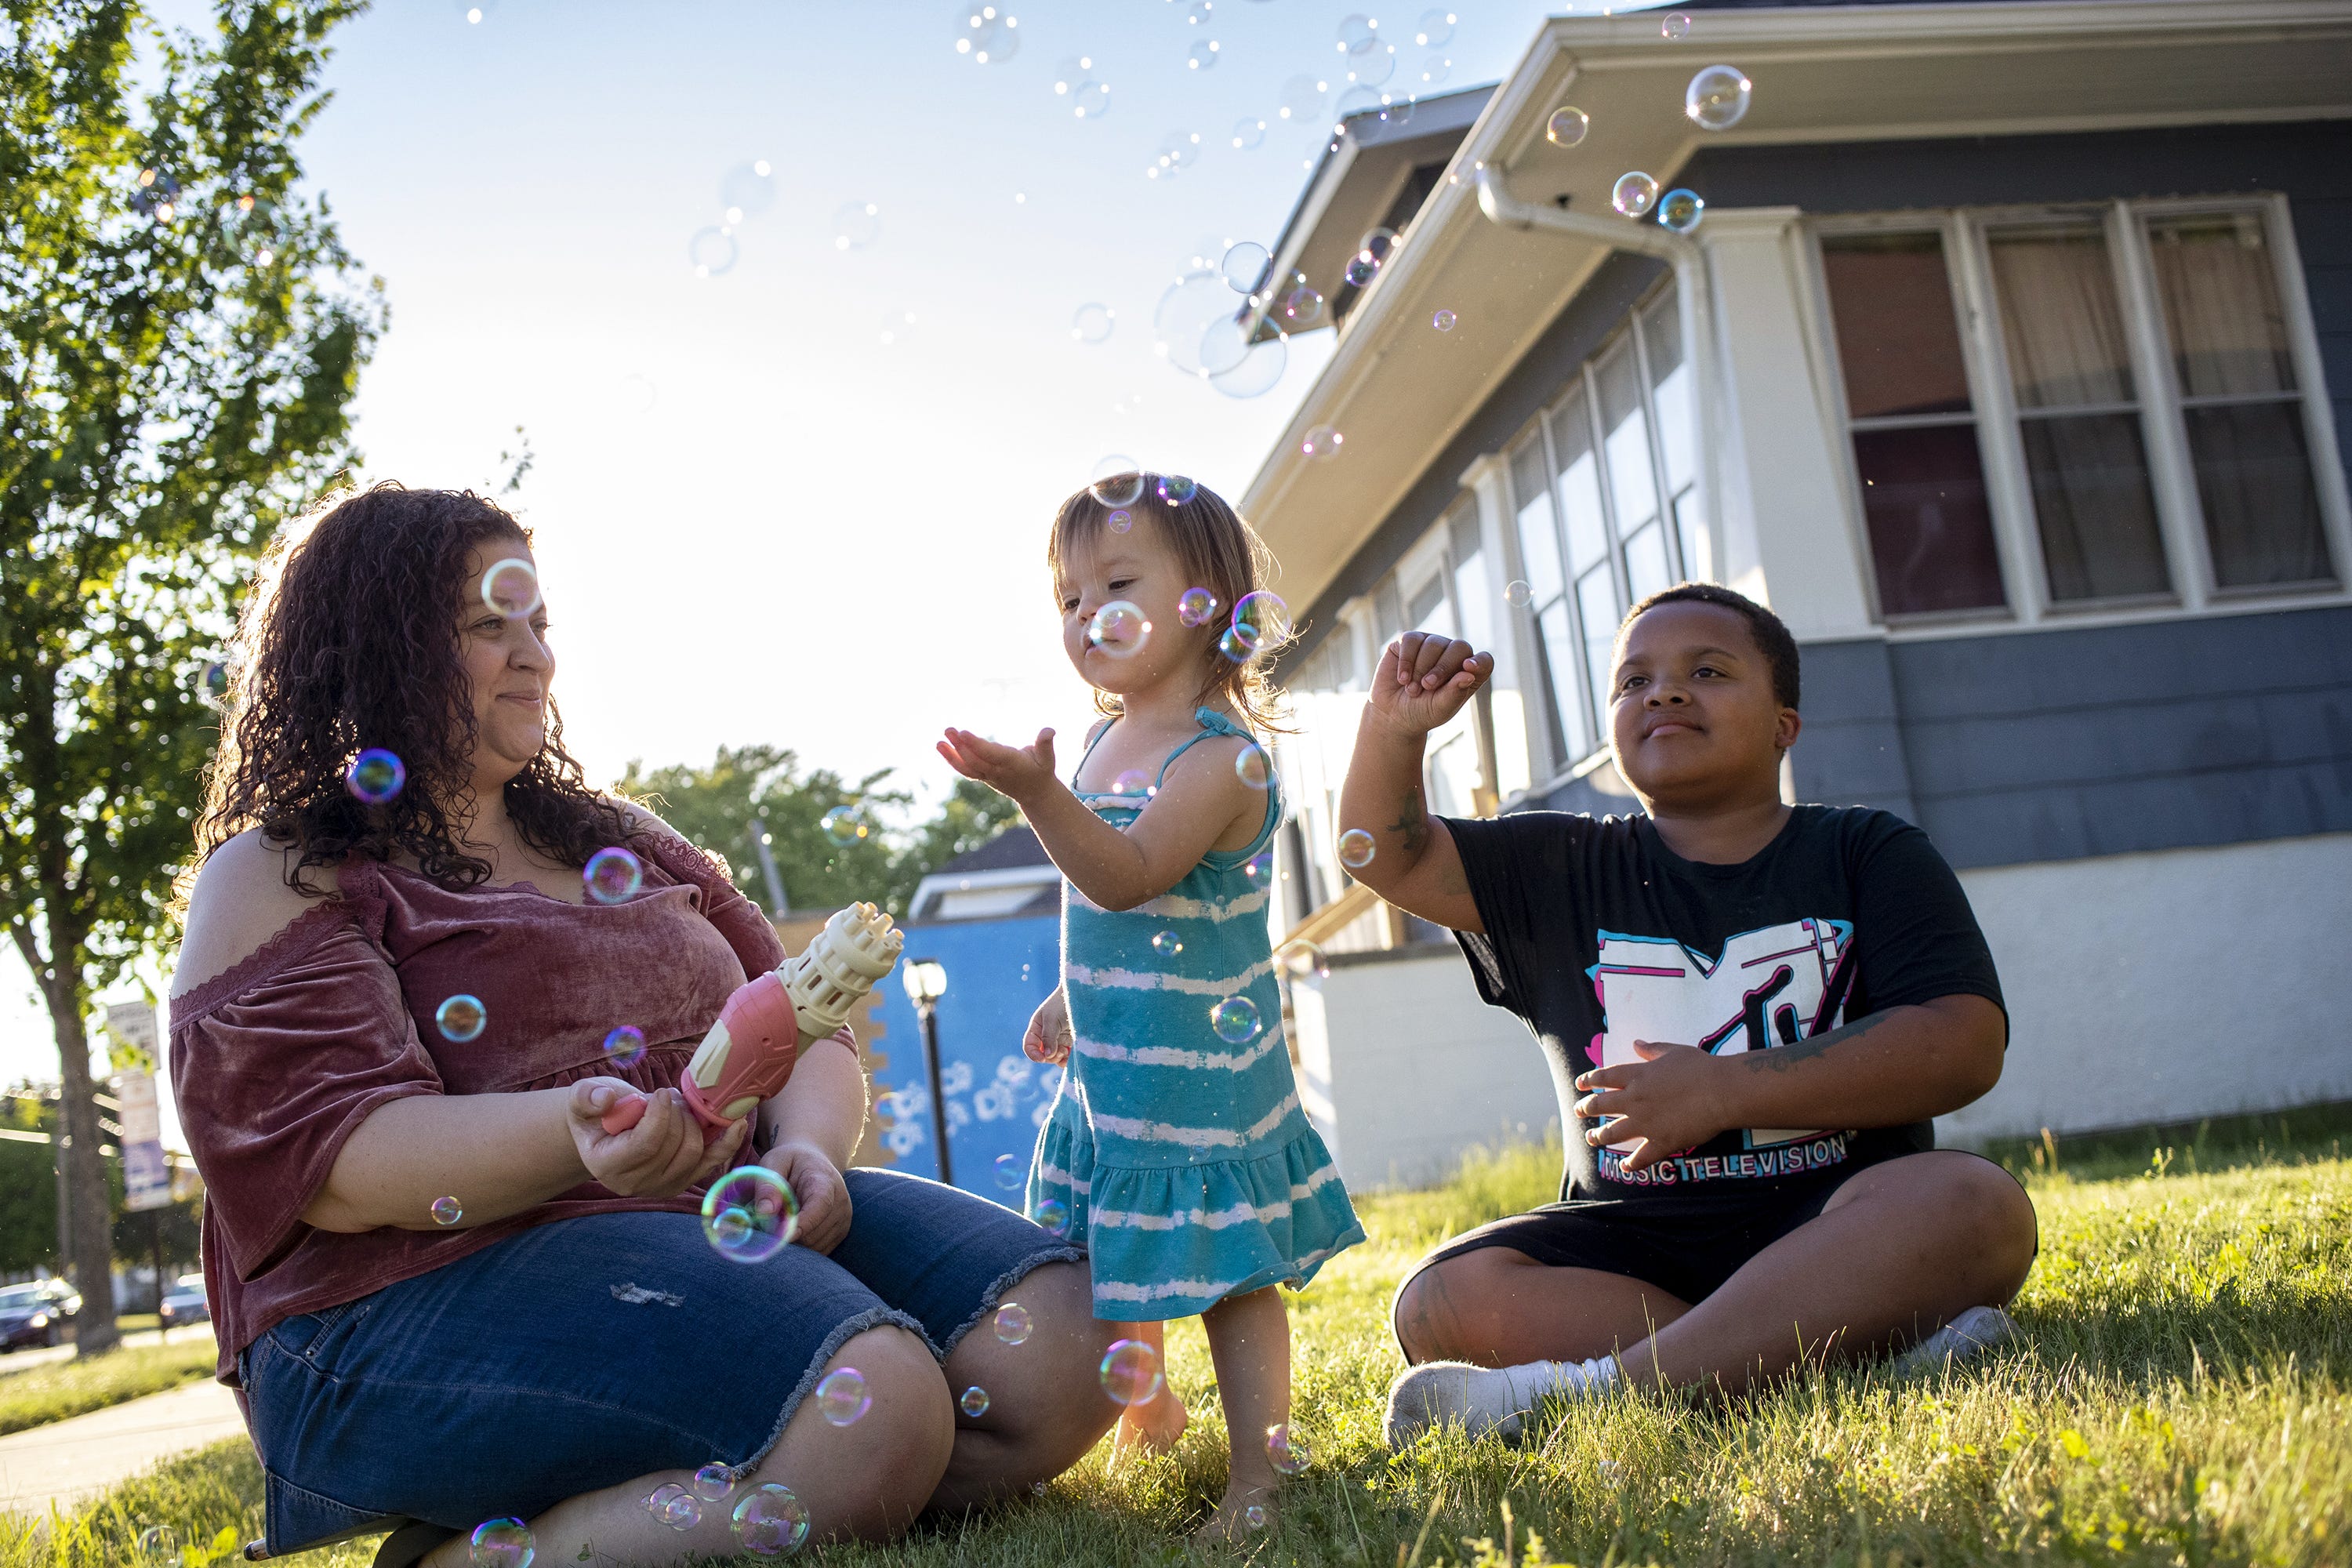 Jaleesa Gray plays with her children outside her home June 15, 2021, Green Bay, Wis.